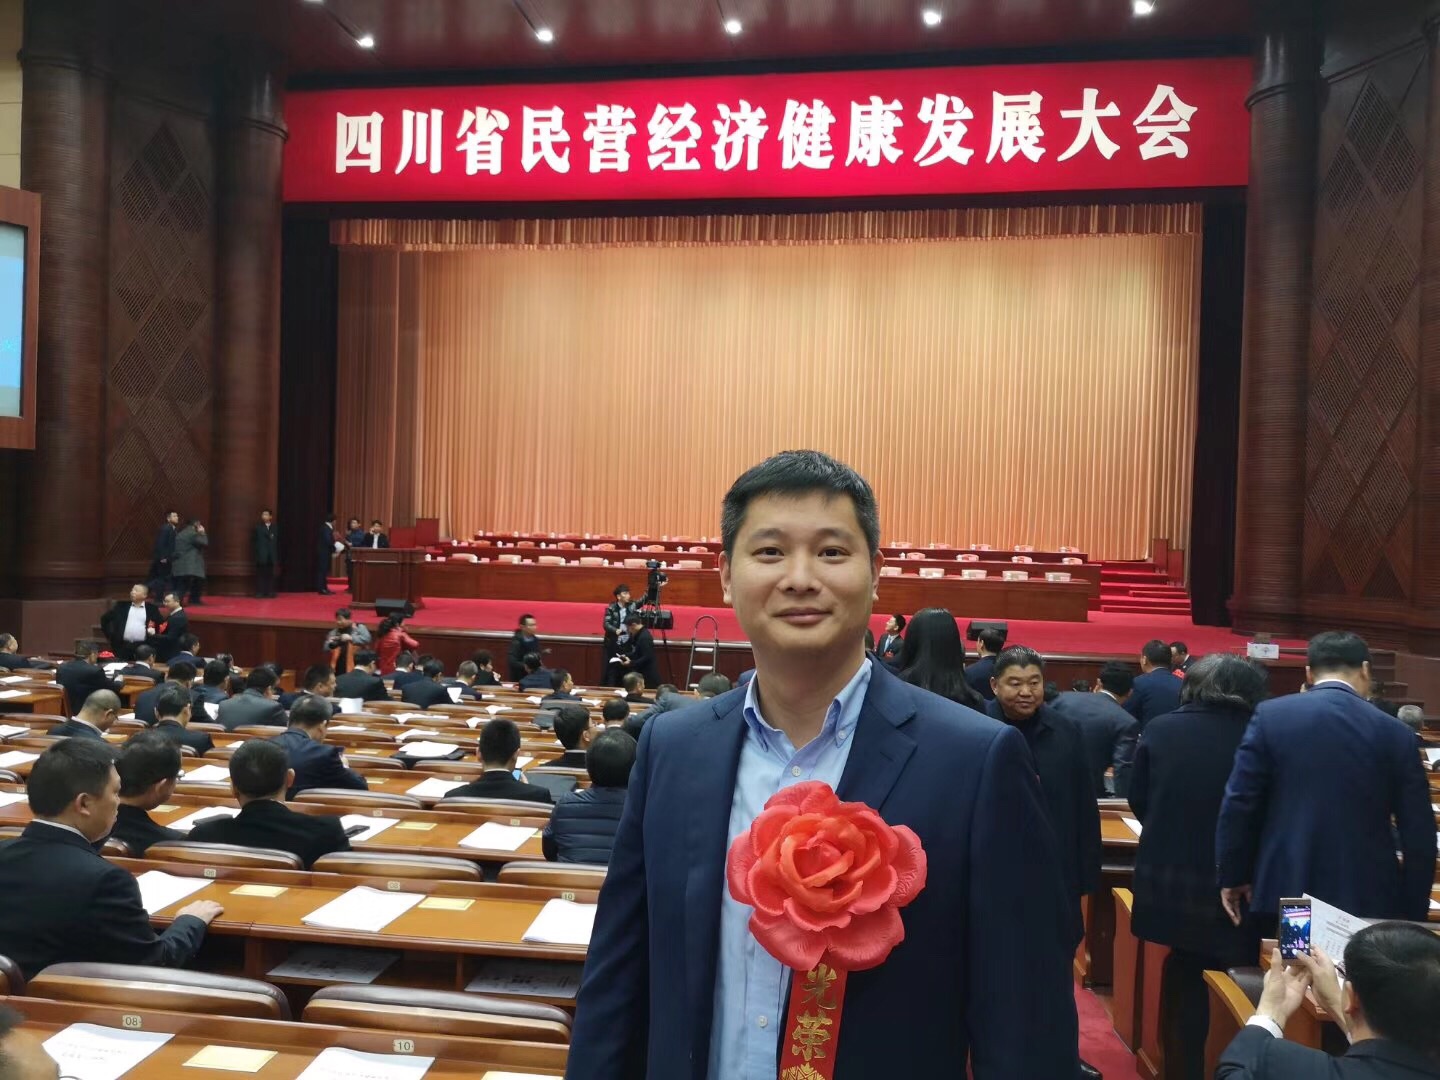 Future can be expected SalvationDATA won the Outstanding Private Enterprises in Sichuan Province